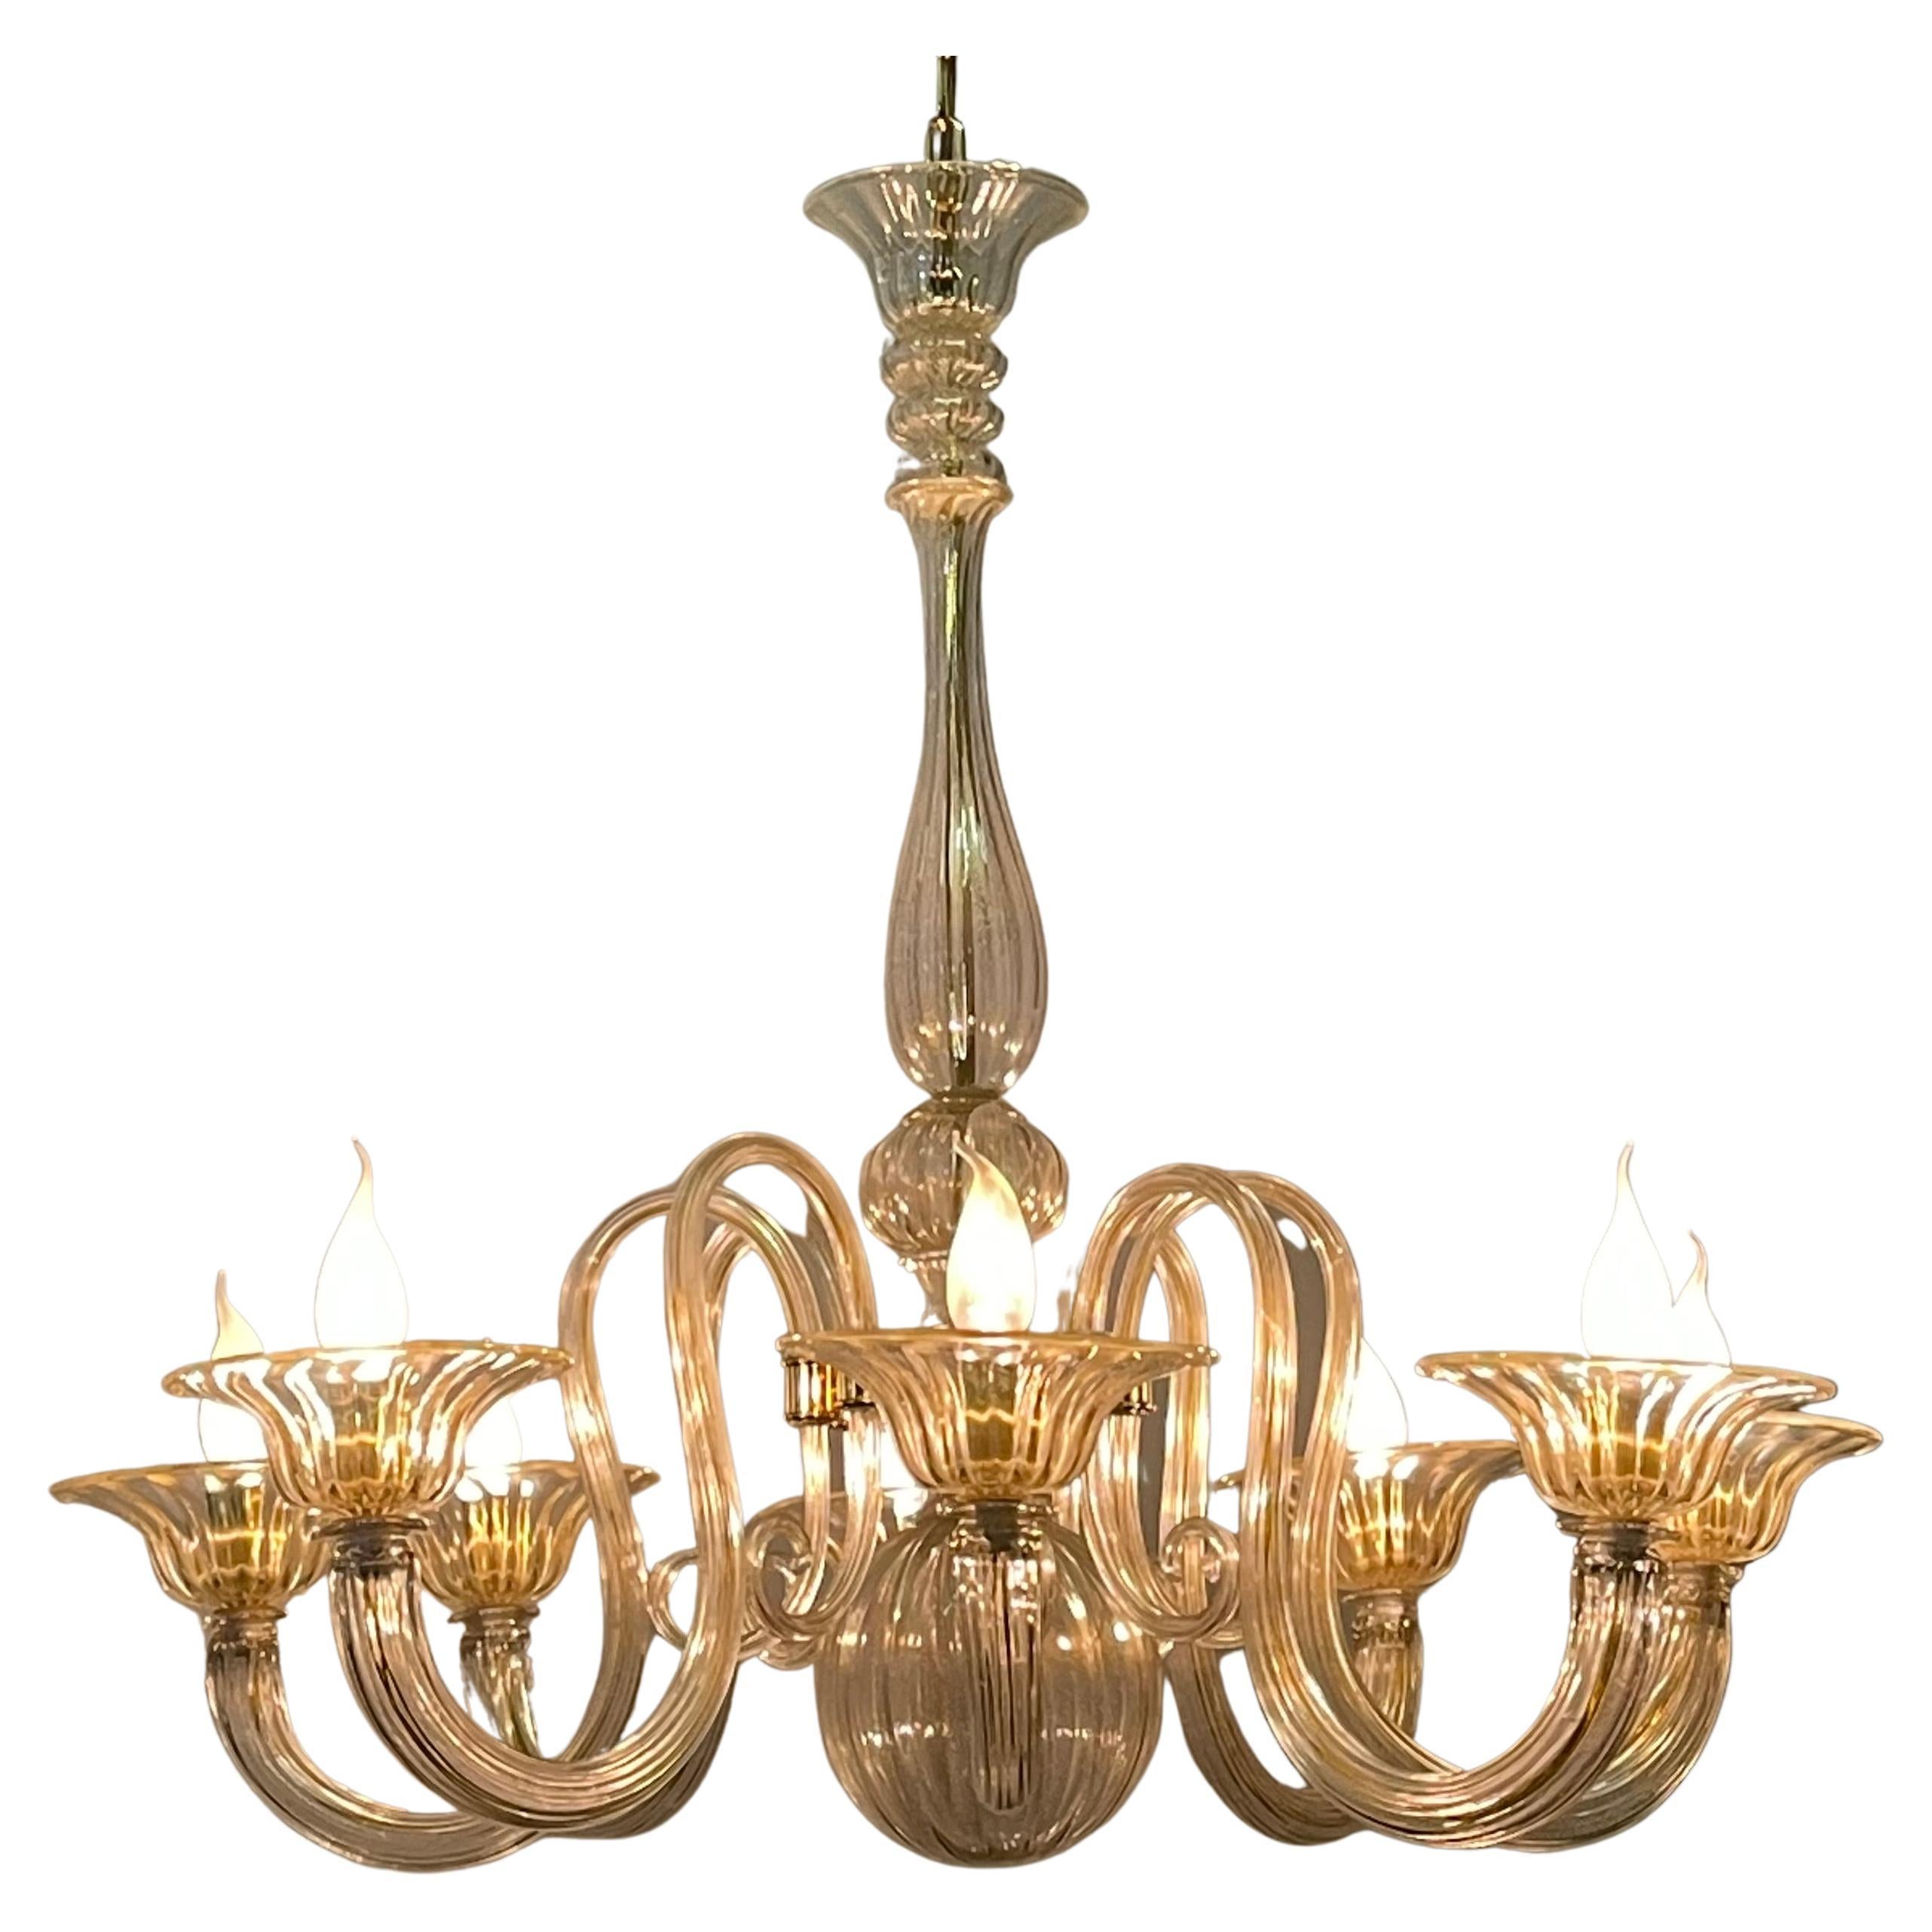 Large Barovier Toso Gold Dusted Murano Glass Chandelier, circa 1960s For Sale 7